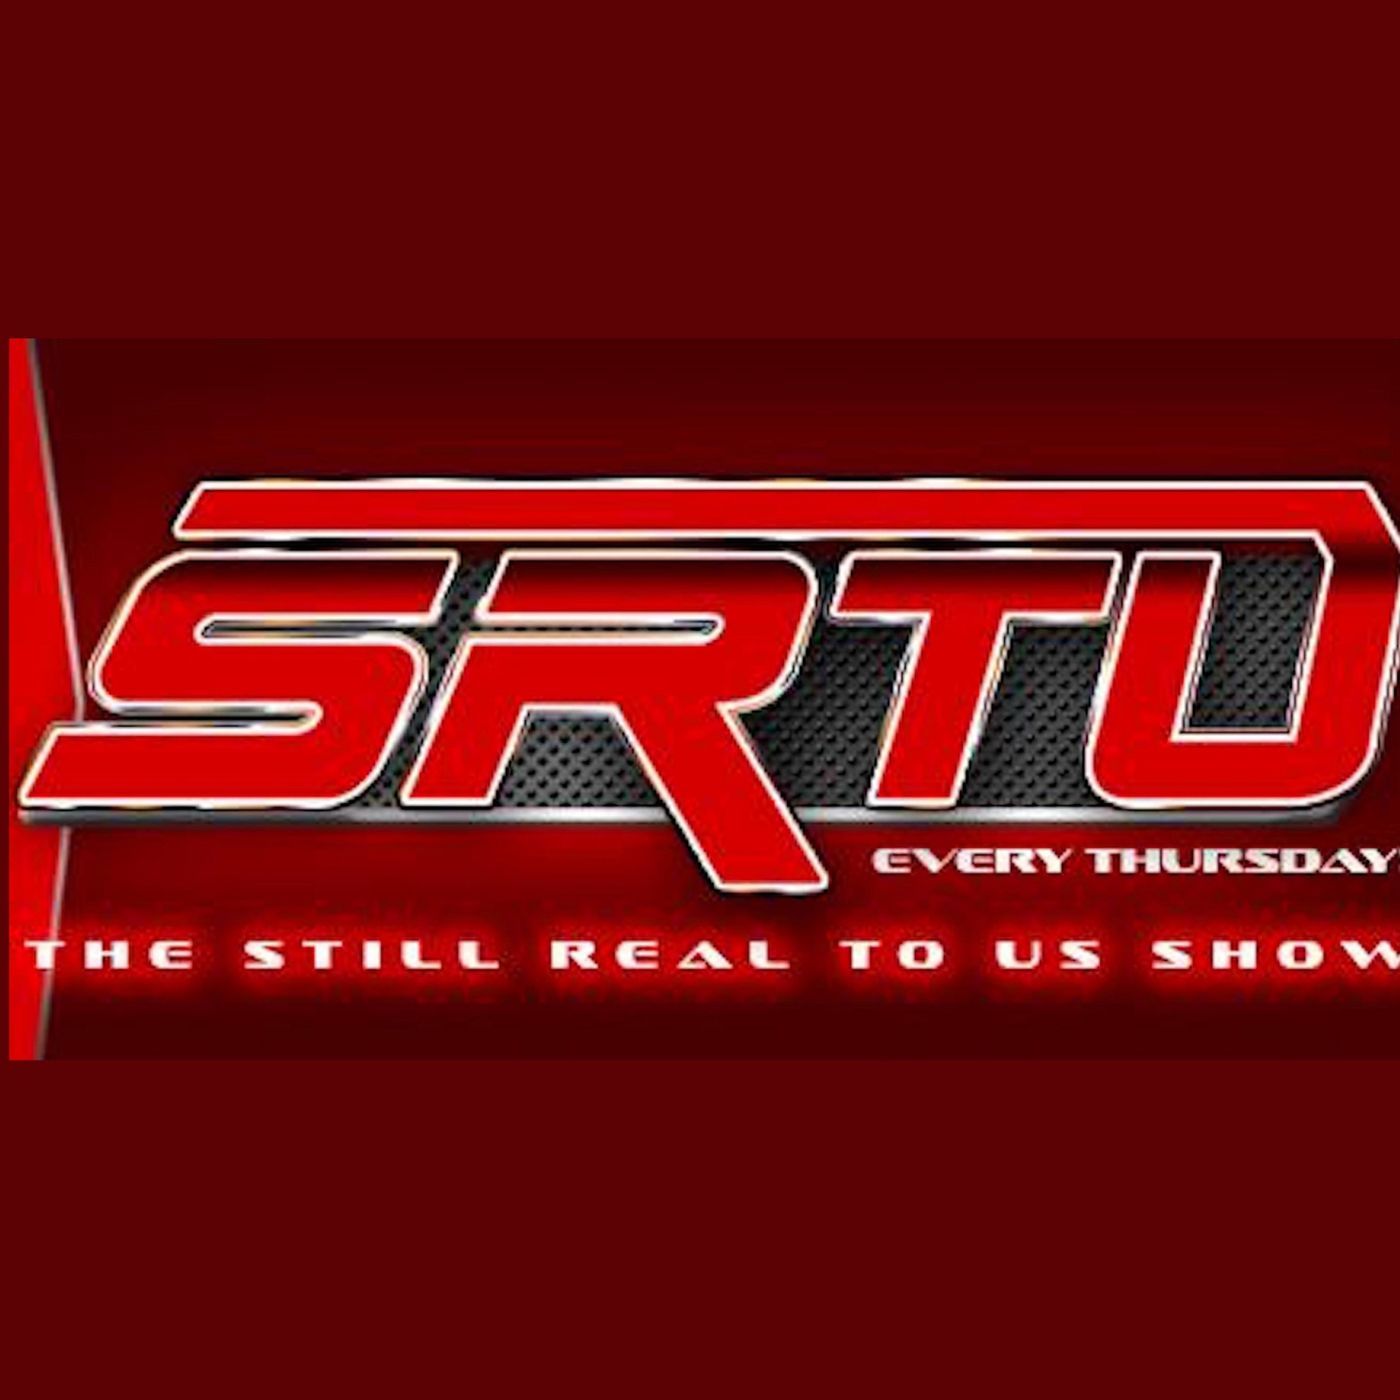 The Still Real to Us Show: Episode #613 – 11/11/21